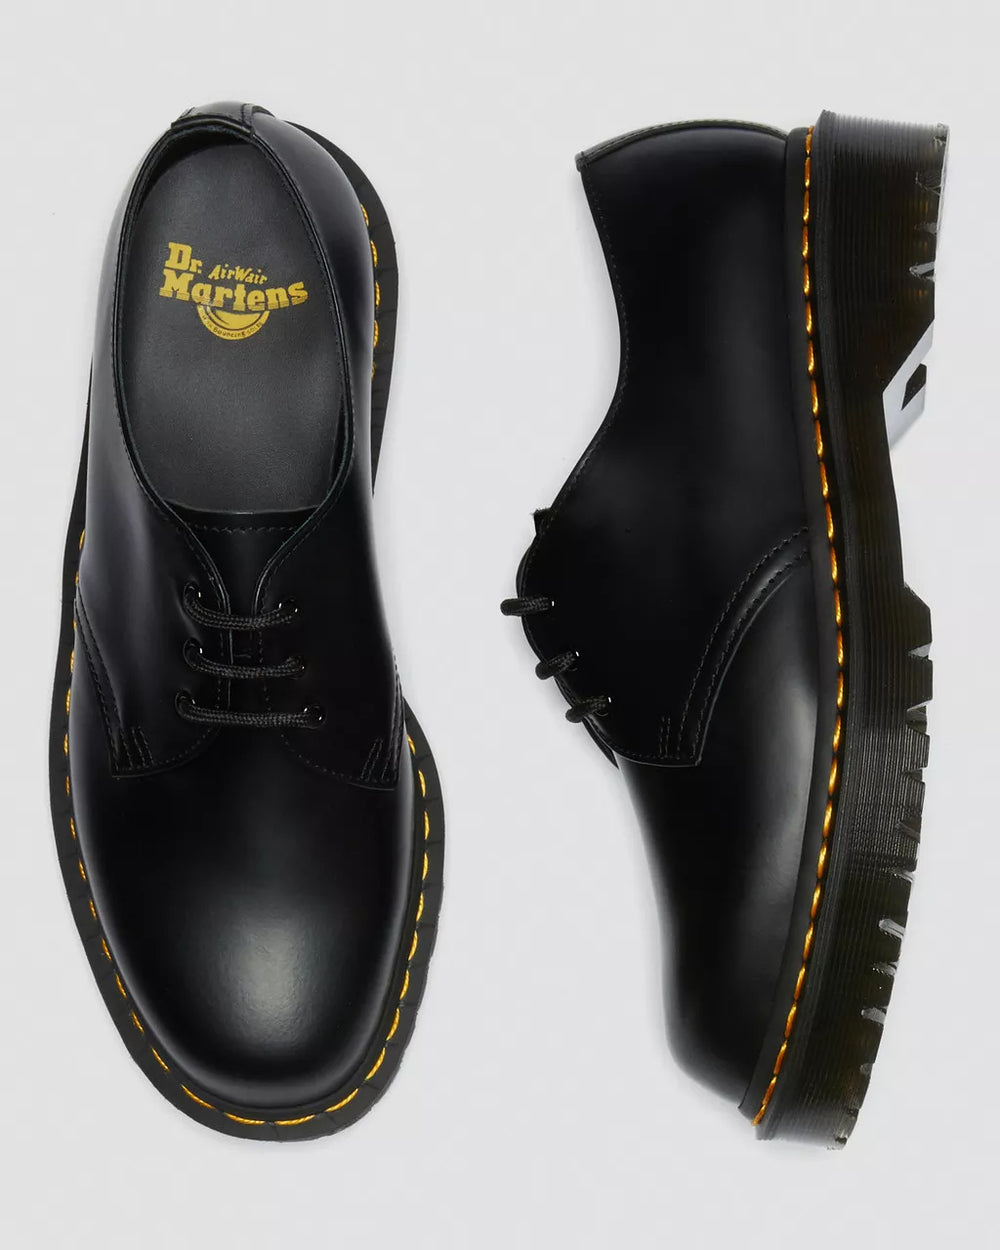 Dr. Martens 1461 Bex Smooth Leather Oxford Shoes – Popshop Usa